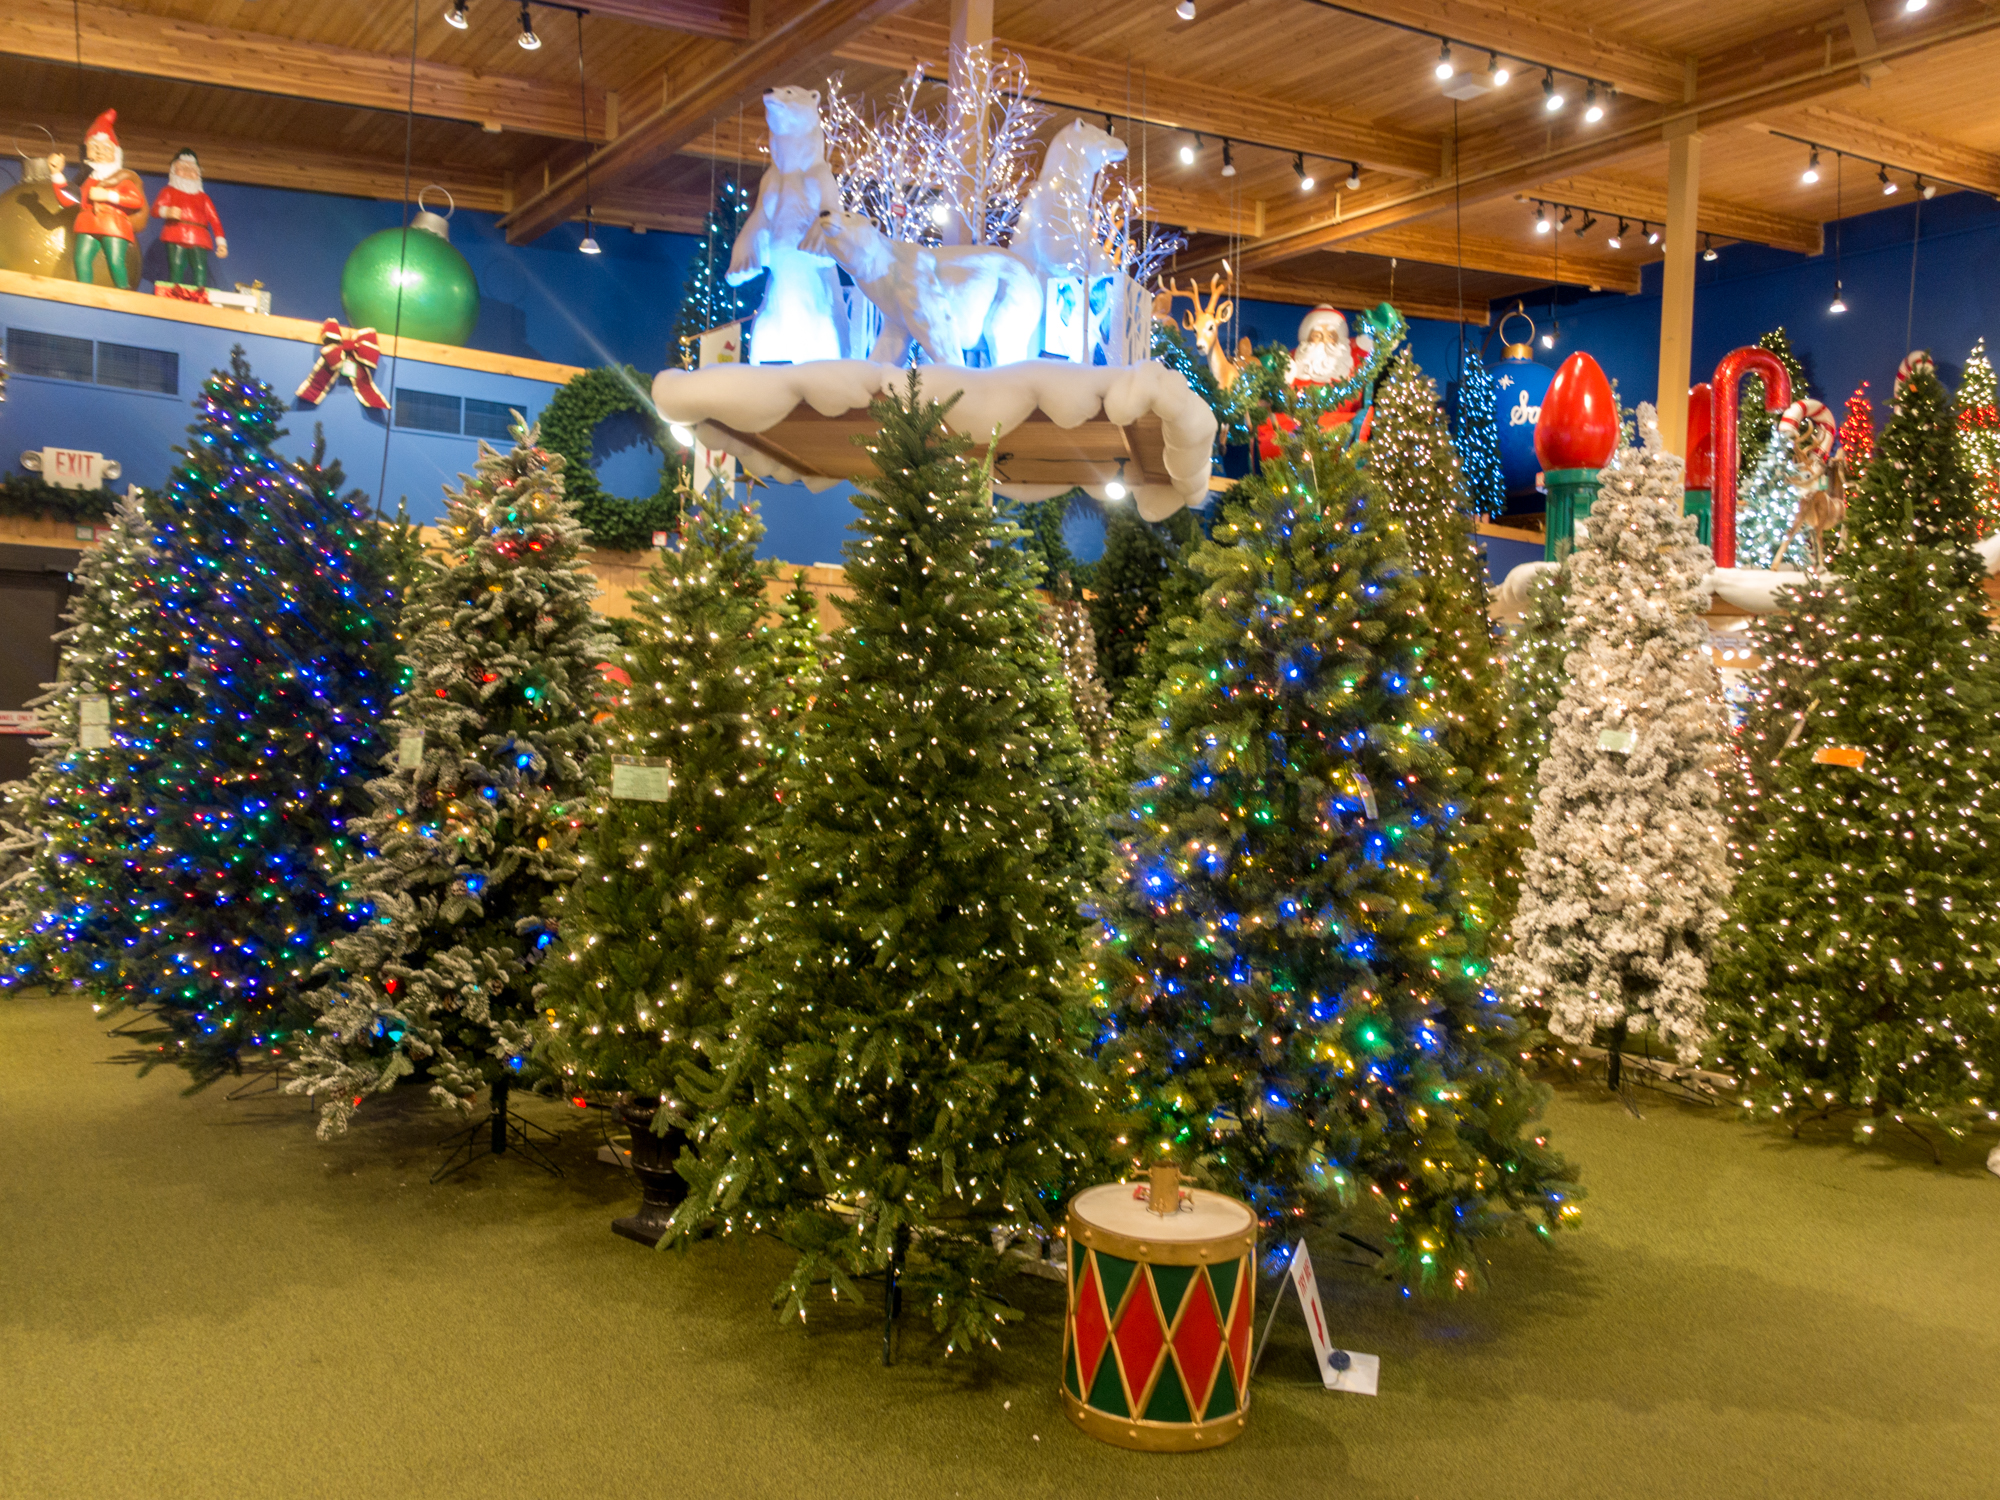 If you are looking for Christmas decorations, gifts, and collectables, Bronner’s is the perfect place to shop. You’ll find over 50,000 Christmas items throughout the store.